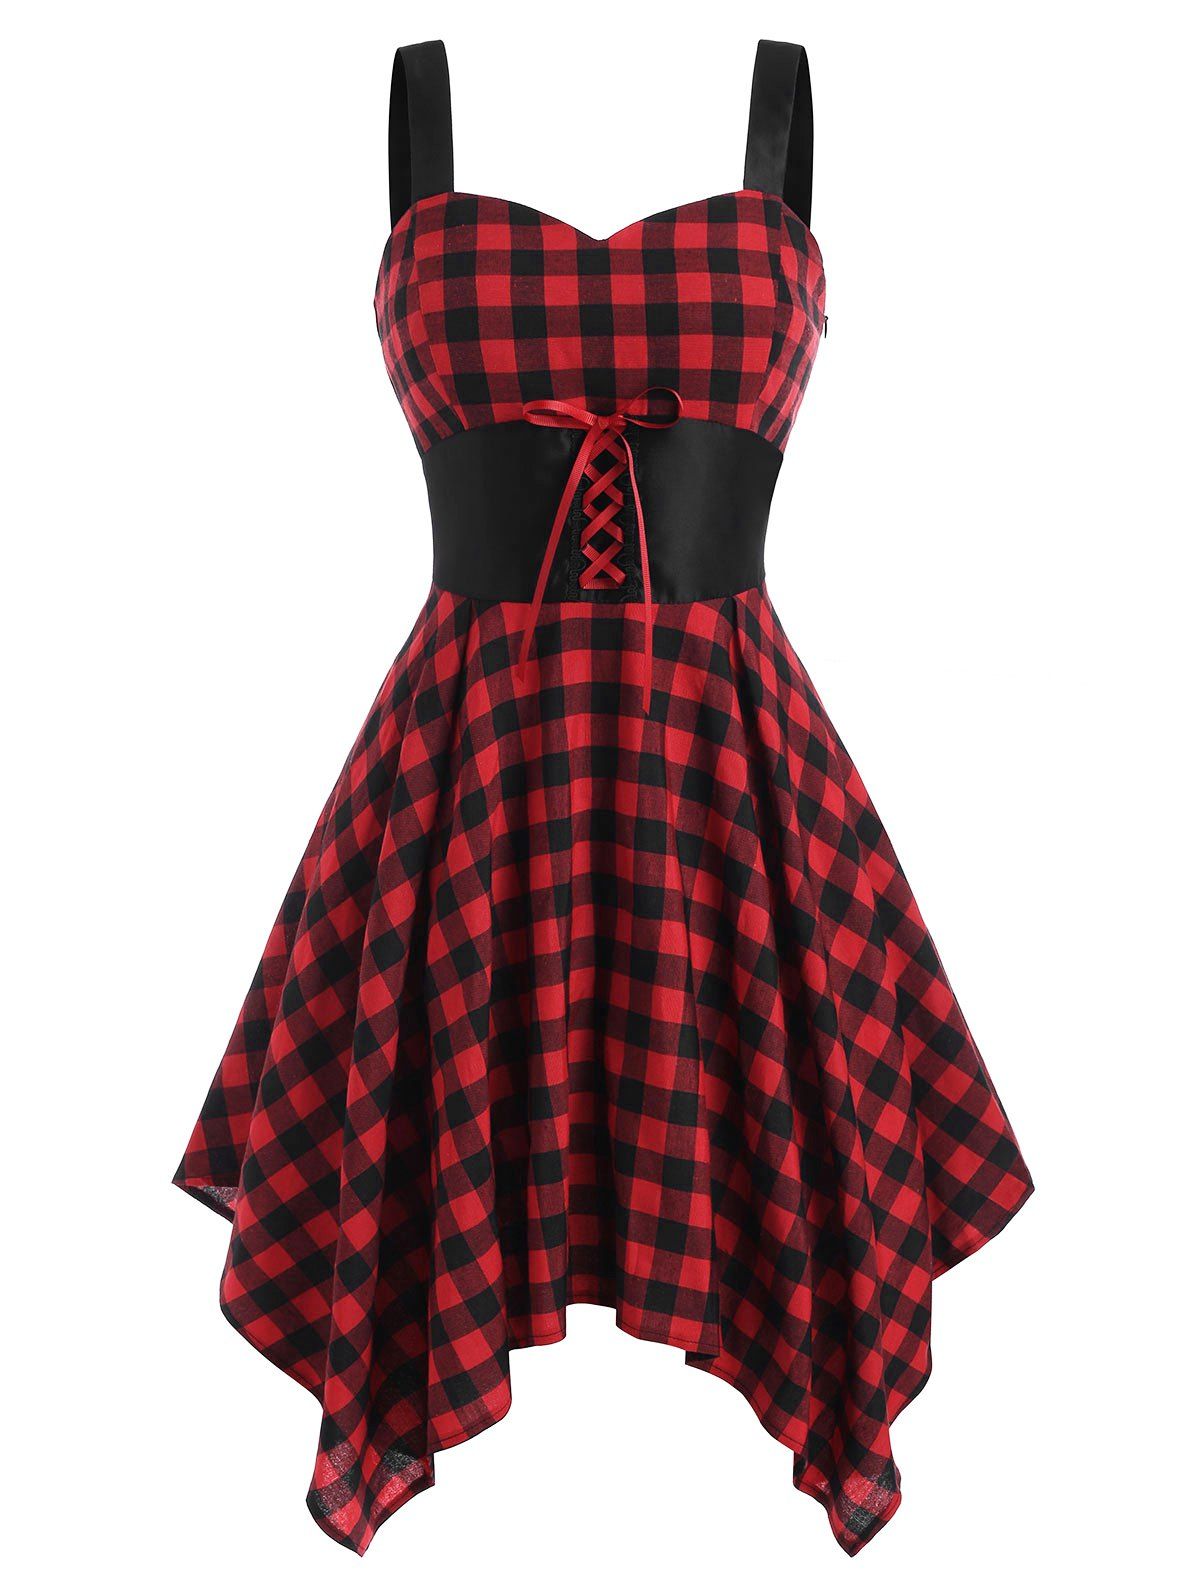 [35% OFF] 2021 Plaid Lace Up Handkerchief Dress In RED | DressLily